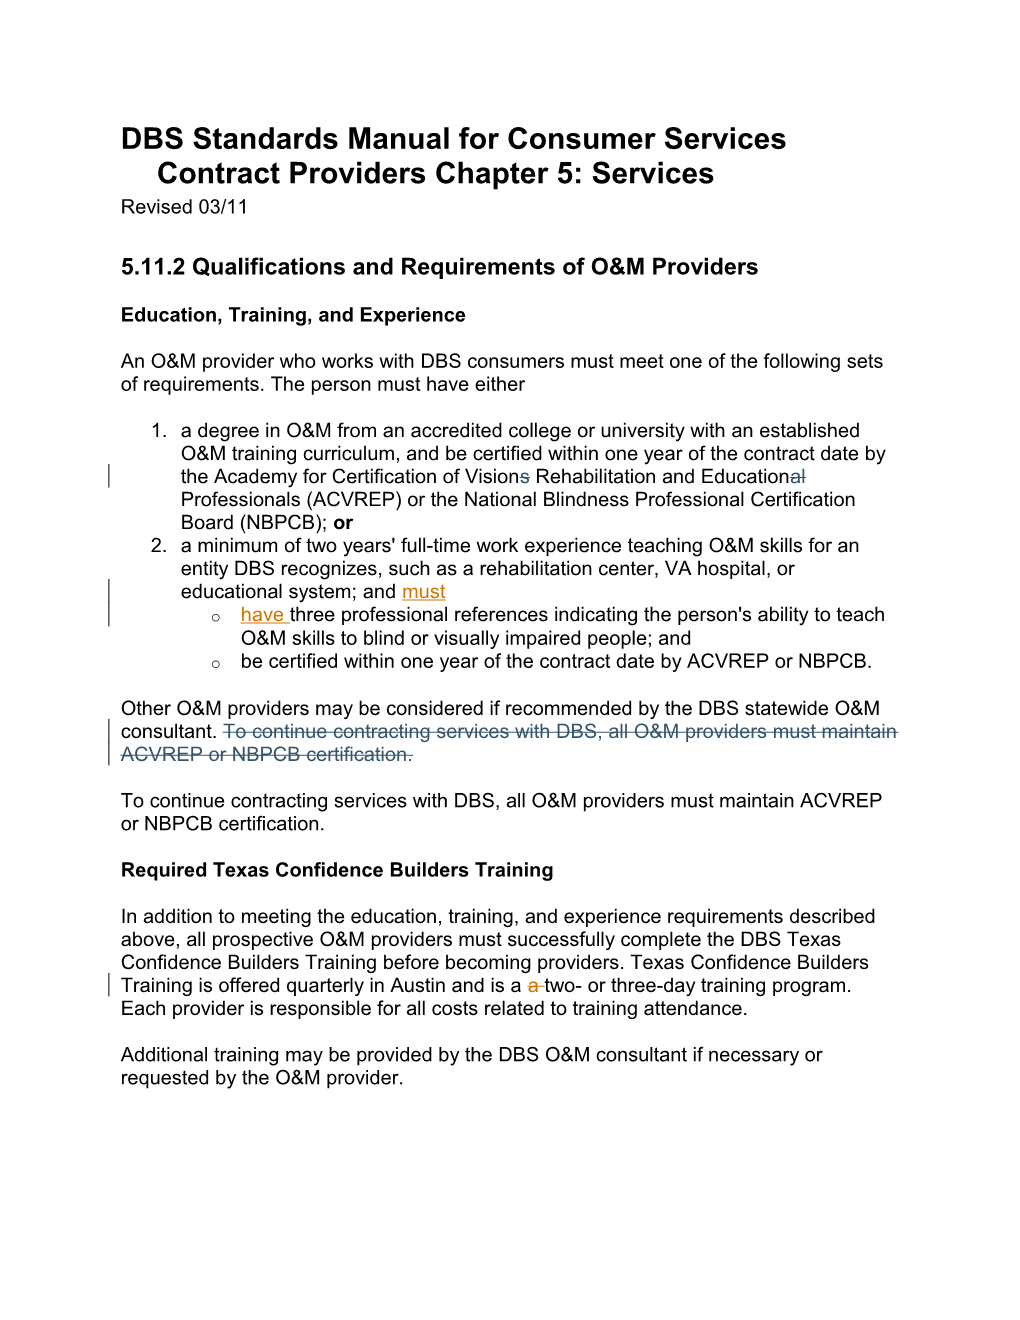 DBS Standards Manual for Consumer Services Contract Providers Chapter 5: Services